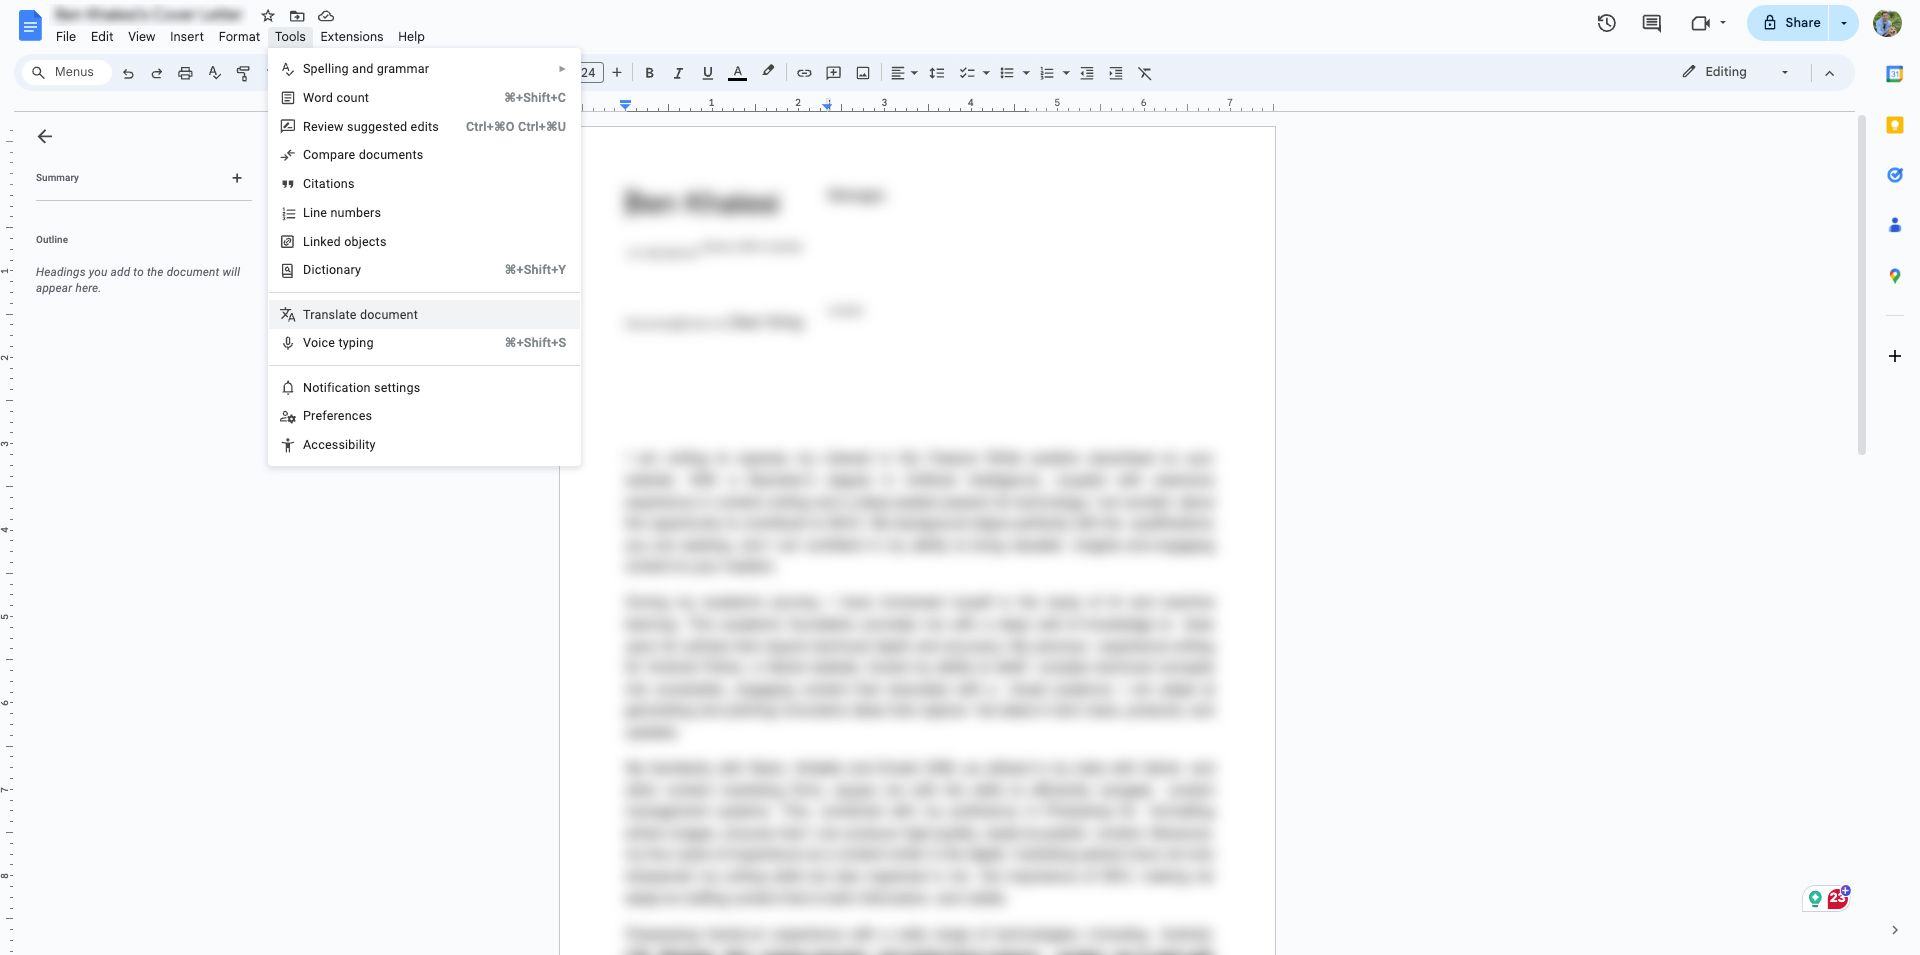 The image displays a Google Docs document opened to editing mode. The 'Tools' menu is open, showing various options like with 'Translate document' Selected. 